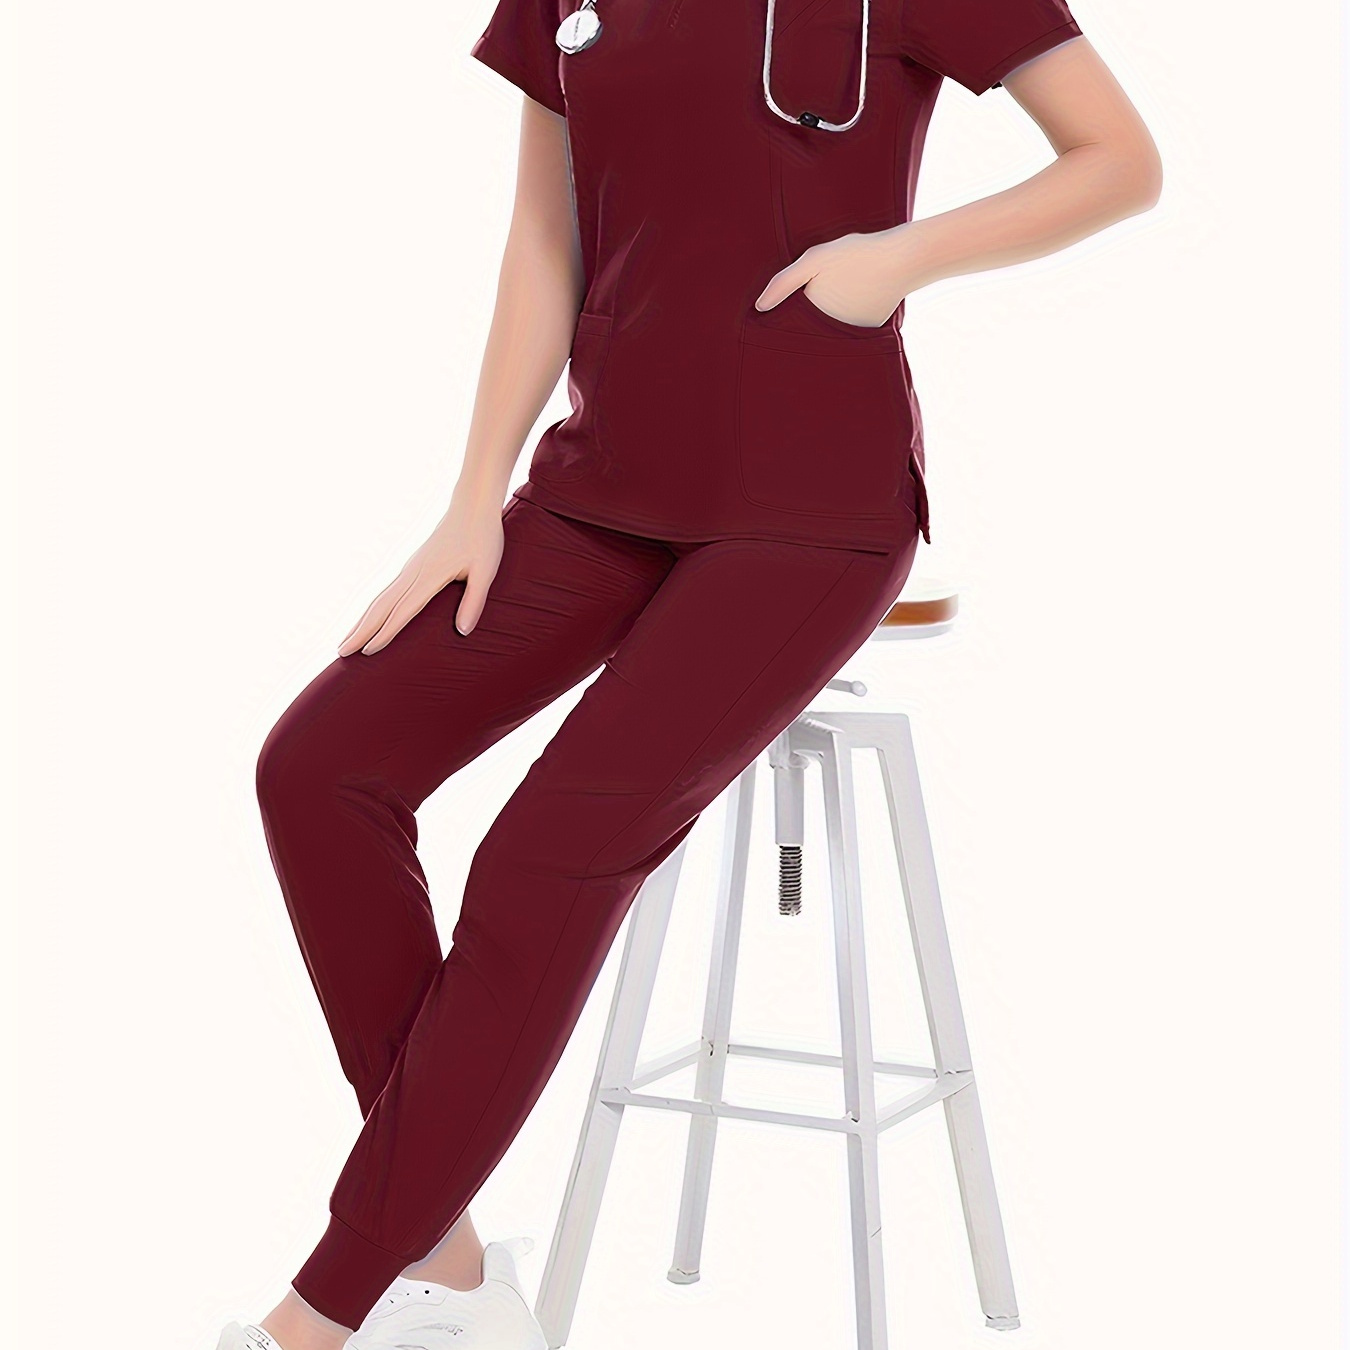 

Nurse Work Two-piece Set, Crew Neck Pocket Front Scrub Tops & Drawstring Pants Outfits For Hospital, Women's Clothing